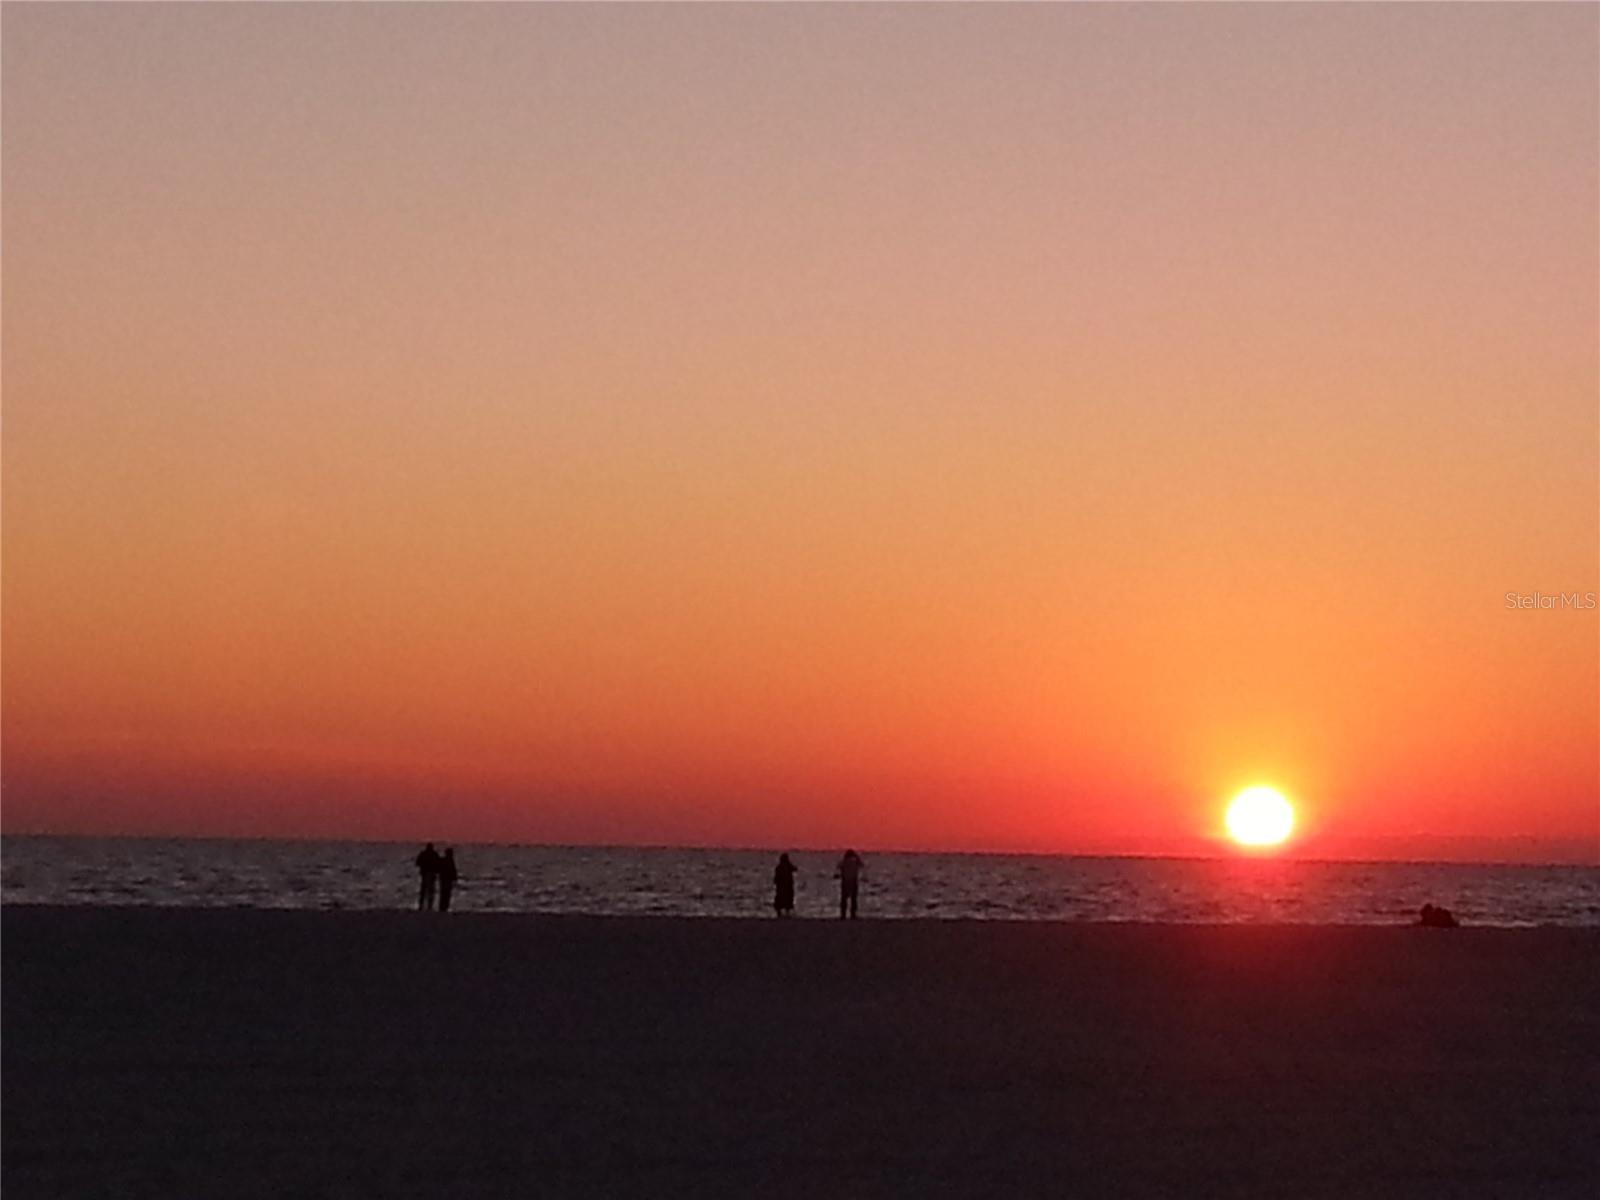 Another sunset on St Pete Beach.